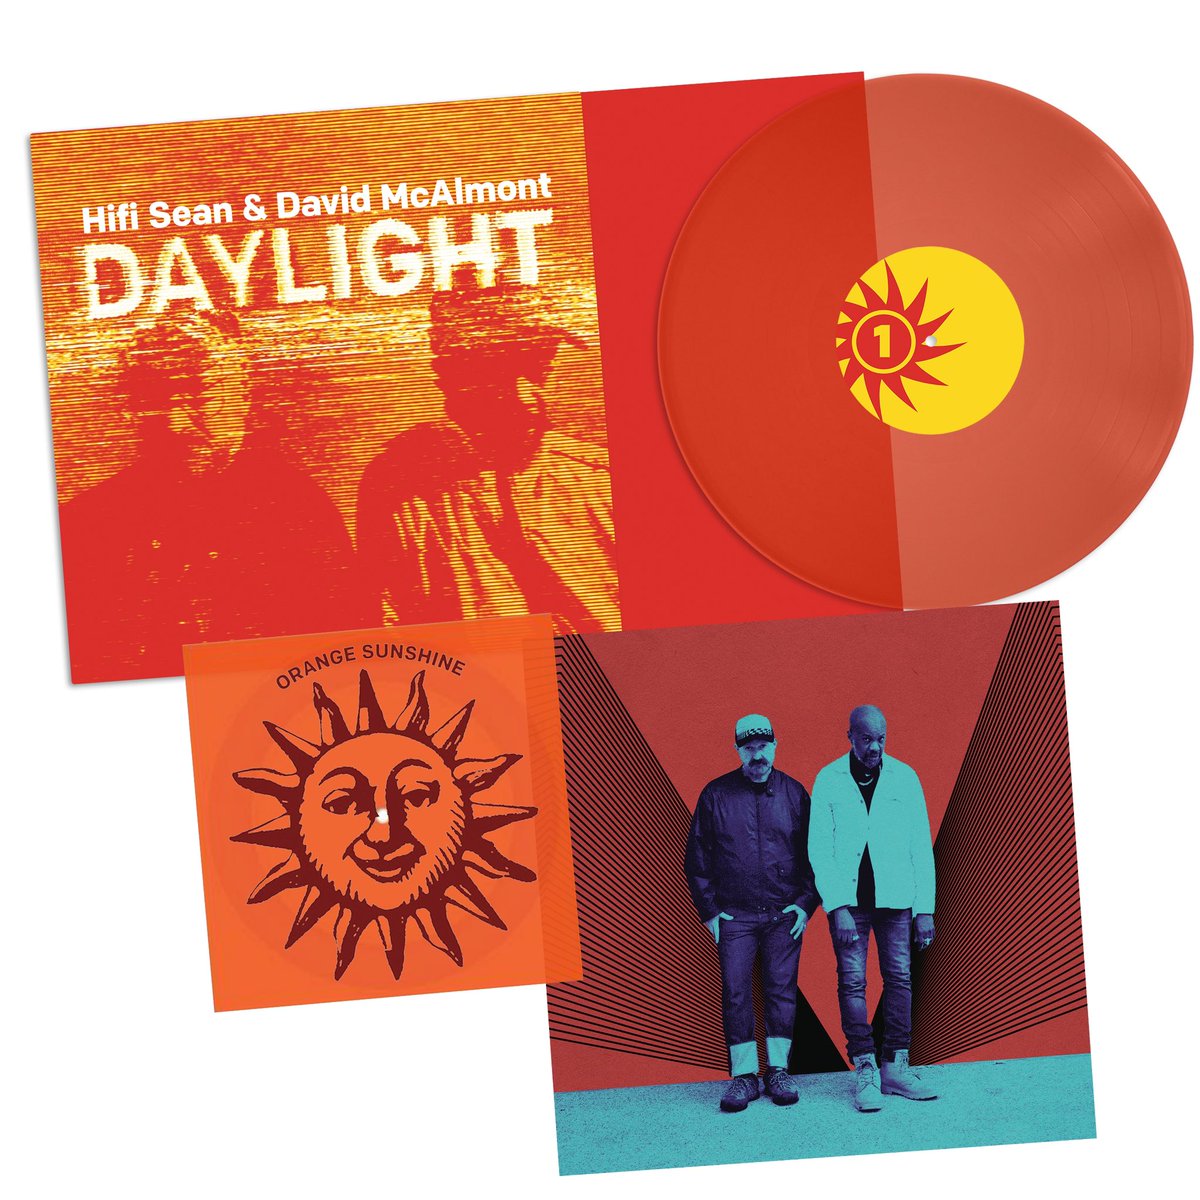 This is the ltd pressing of our new album DAYLIGHT. June 20th. It has a free bonus track flexi-disc ,signed art print , downloadable lyric picture book & neon orange vinyl. There are only 200 copies. Link here for my Bandcamp store to grab one. linktr.ee/McHifi